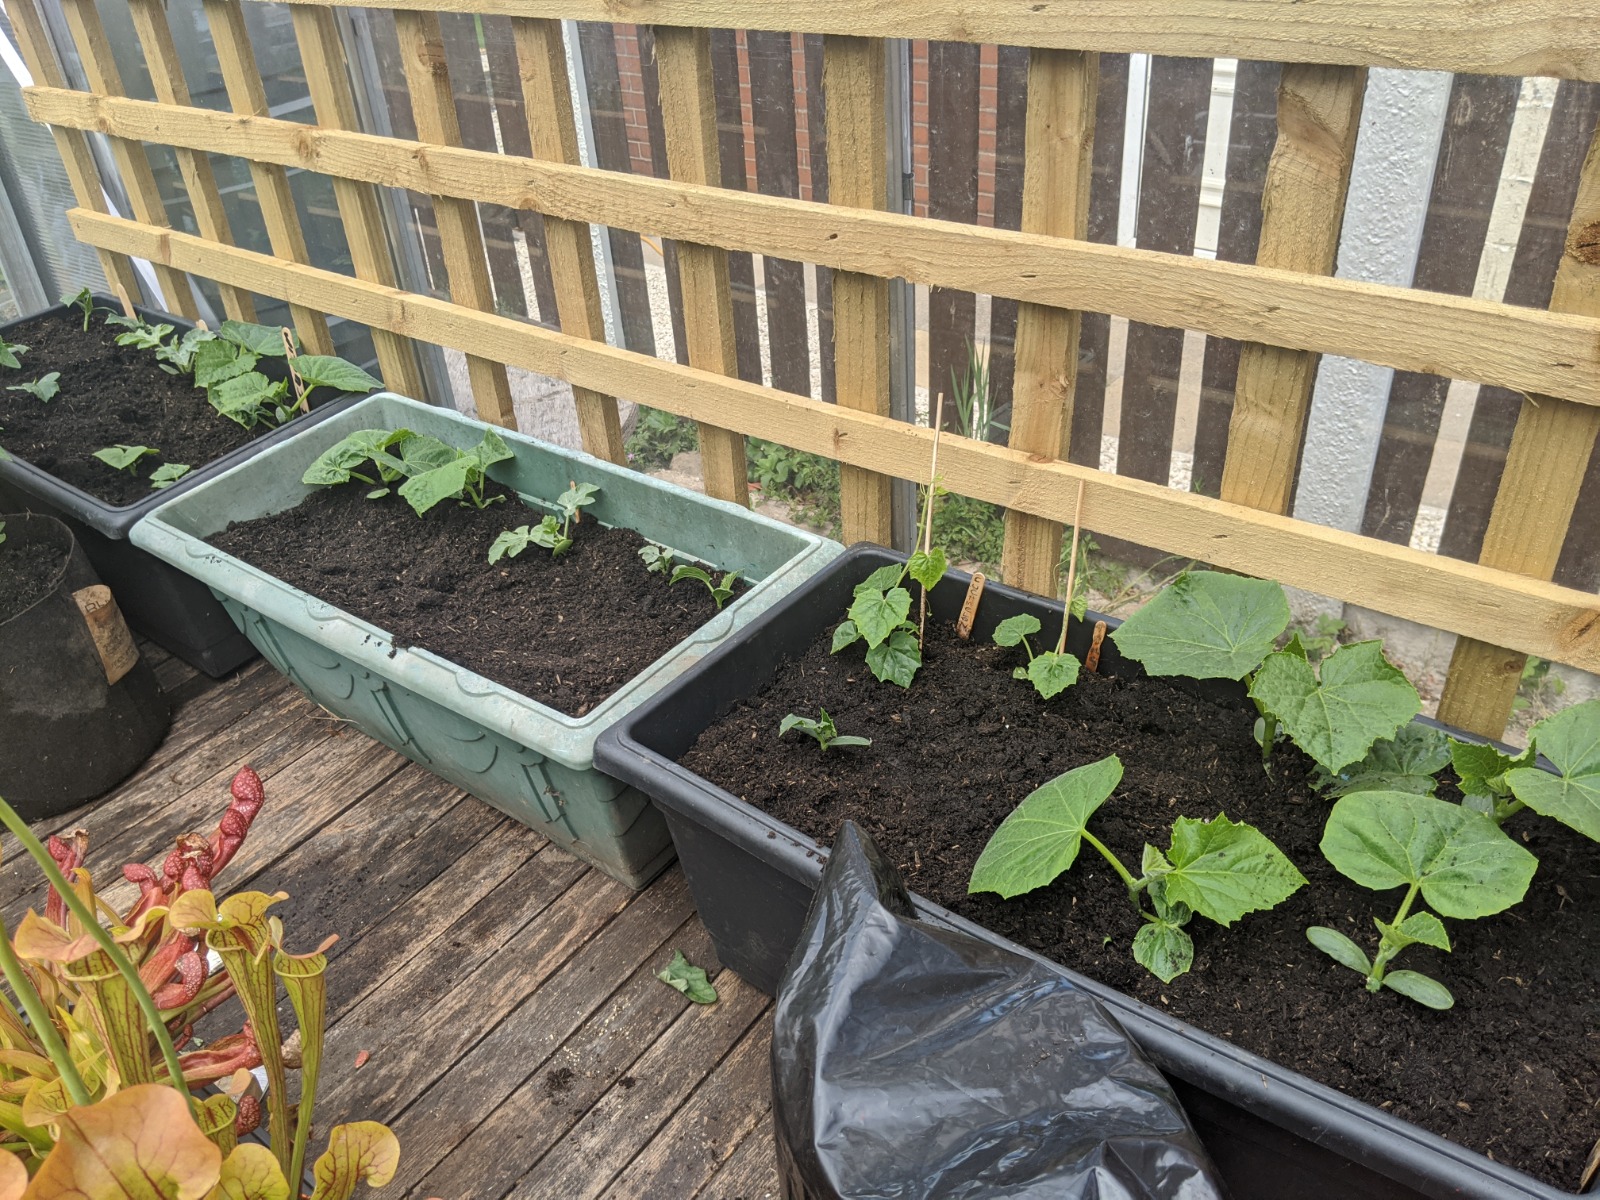 Growing courgettes in pots